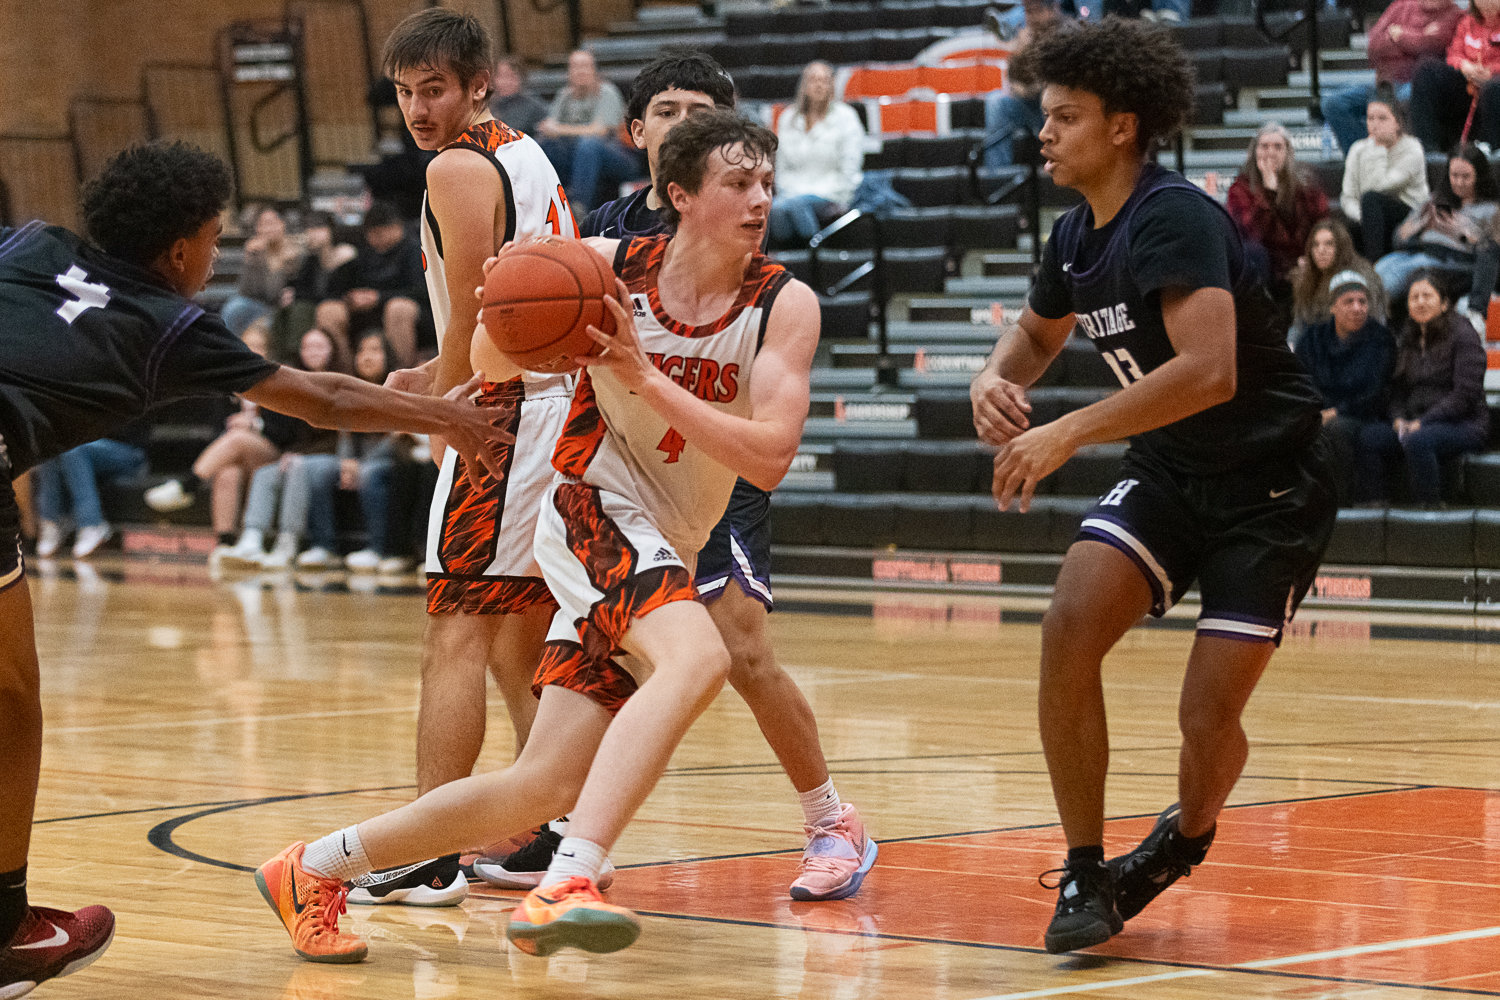 Aiden Haines blows past one defender and prepares to take on a second during the fourth quarter of Centralia's 56-34 loss to Heritage on Dec. 2.